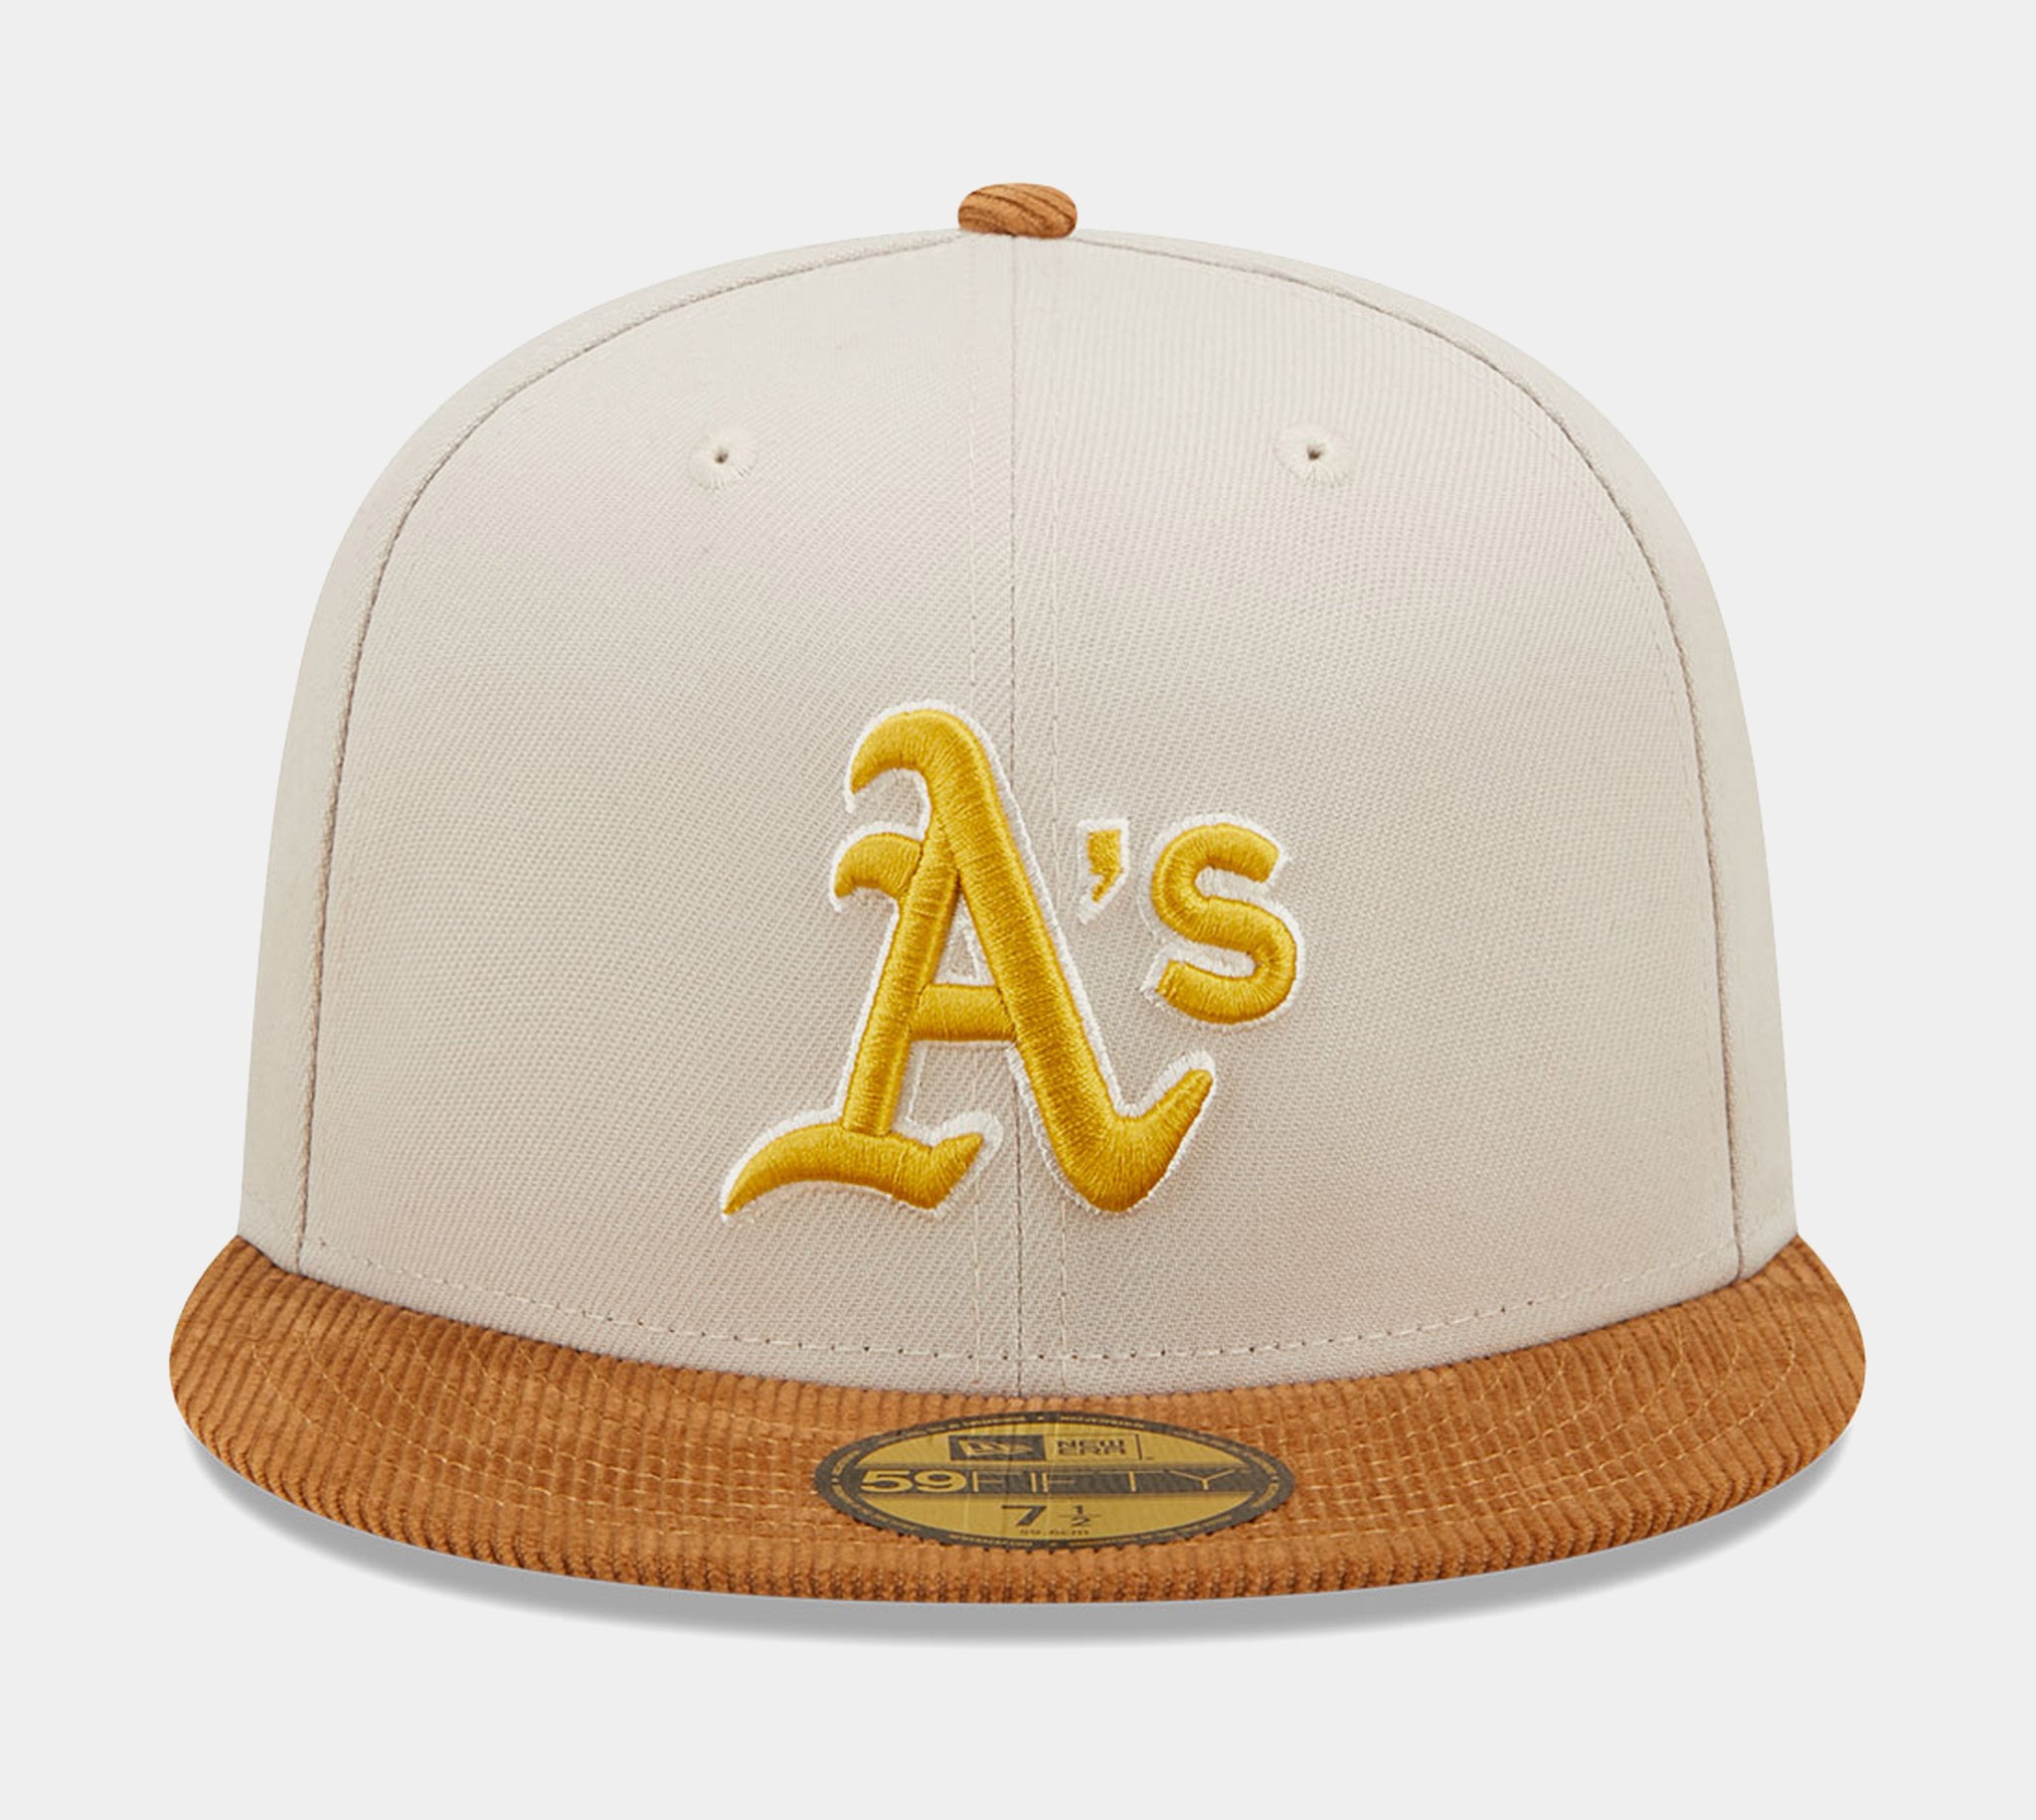 Oakland Athletics Corduroy Visor 59FIFTY Mens Fitted Hat (White/Brown)